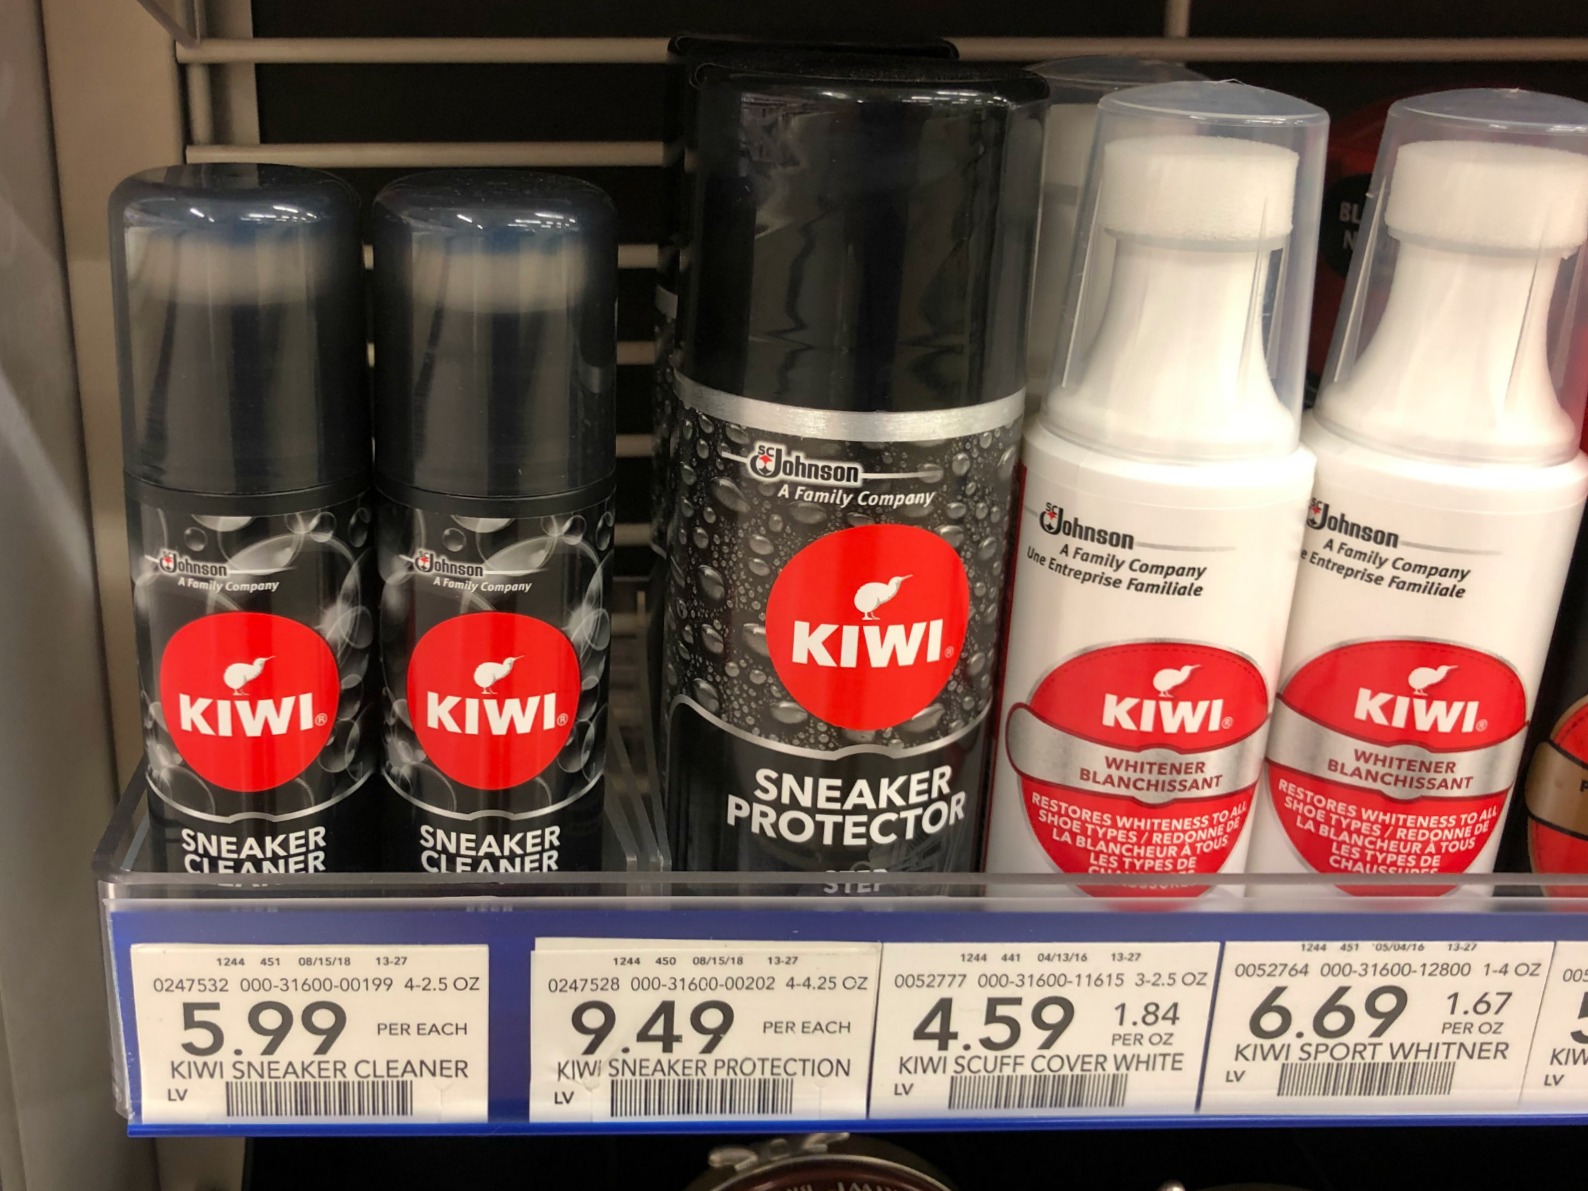 Find A Big Selection Of KIWI® Shoe Care Products At Publix – Keep Your Shoes Looking Their Best